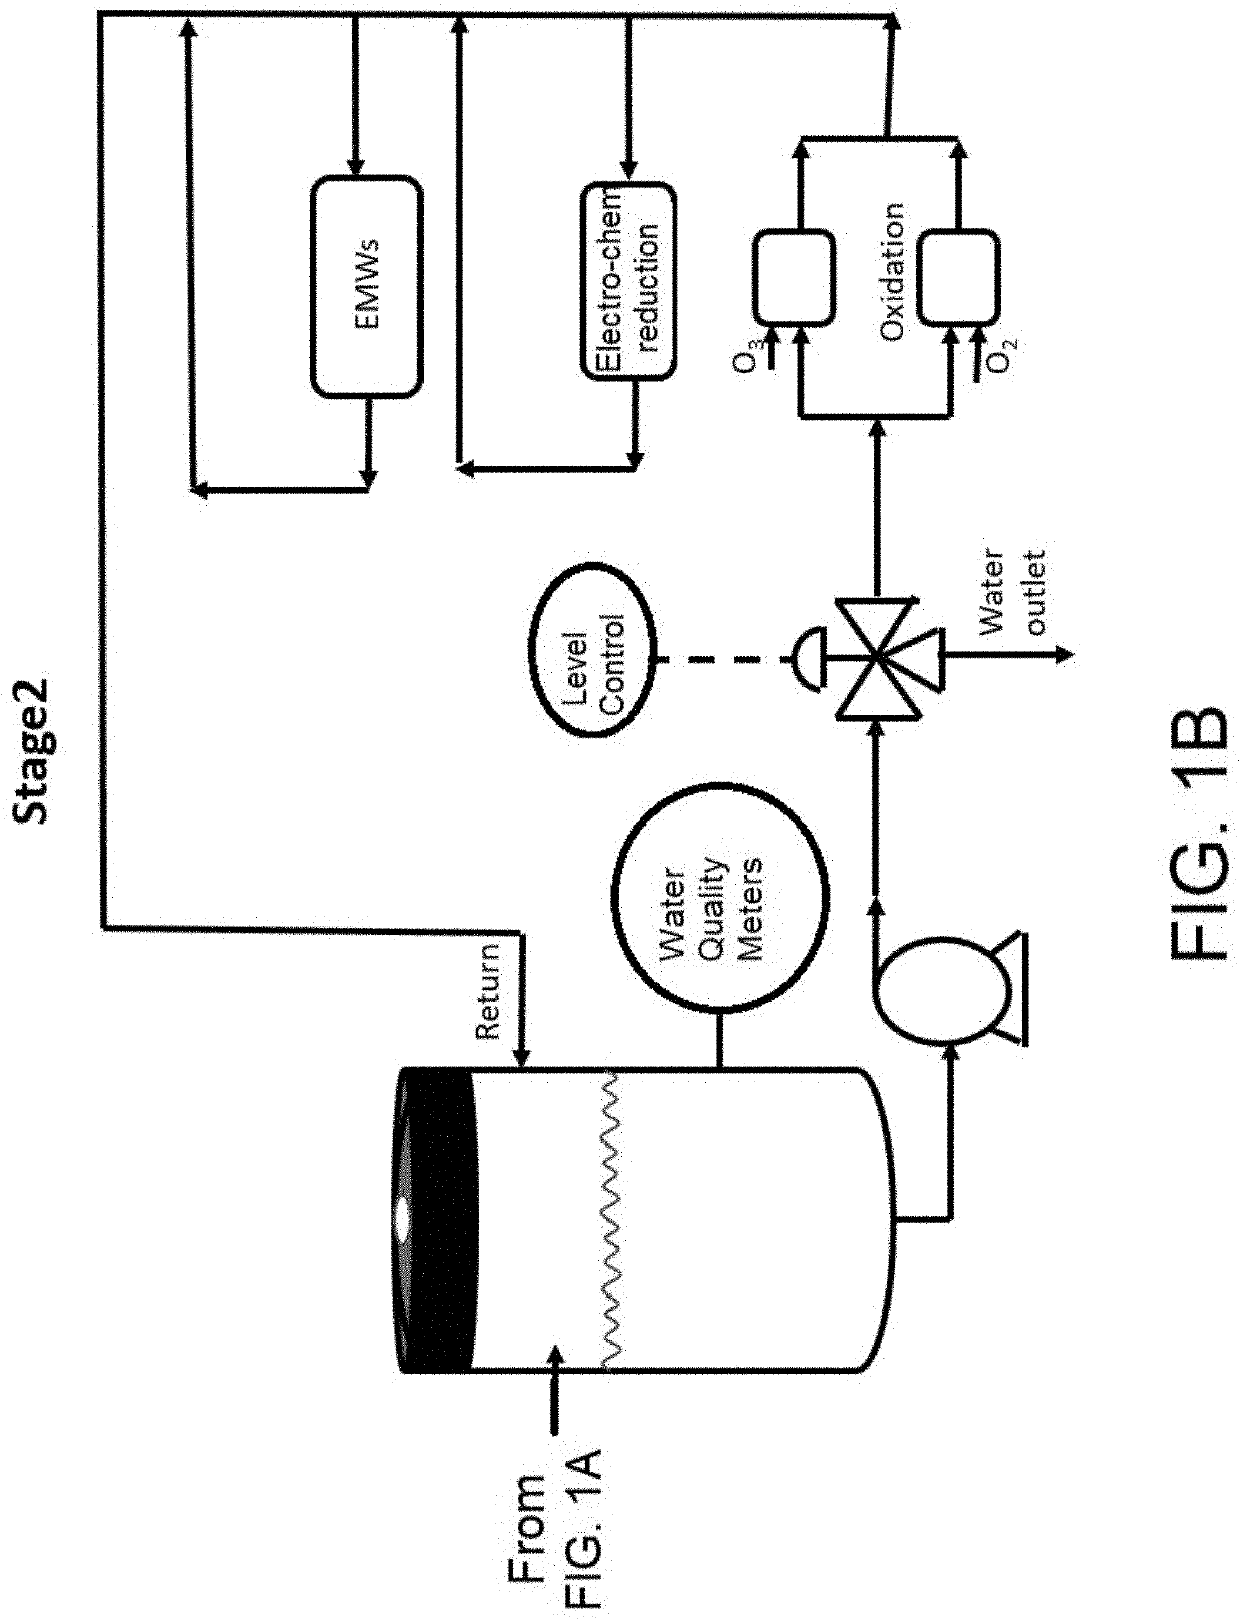 Continuous, approximately real-time residential wastewater treatment system and apparatus